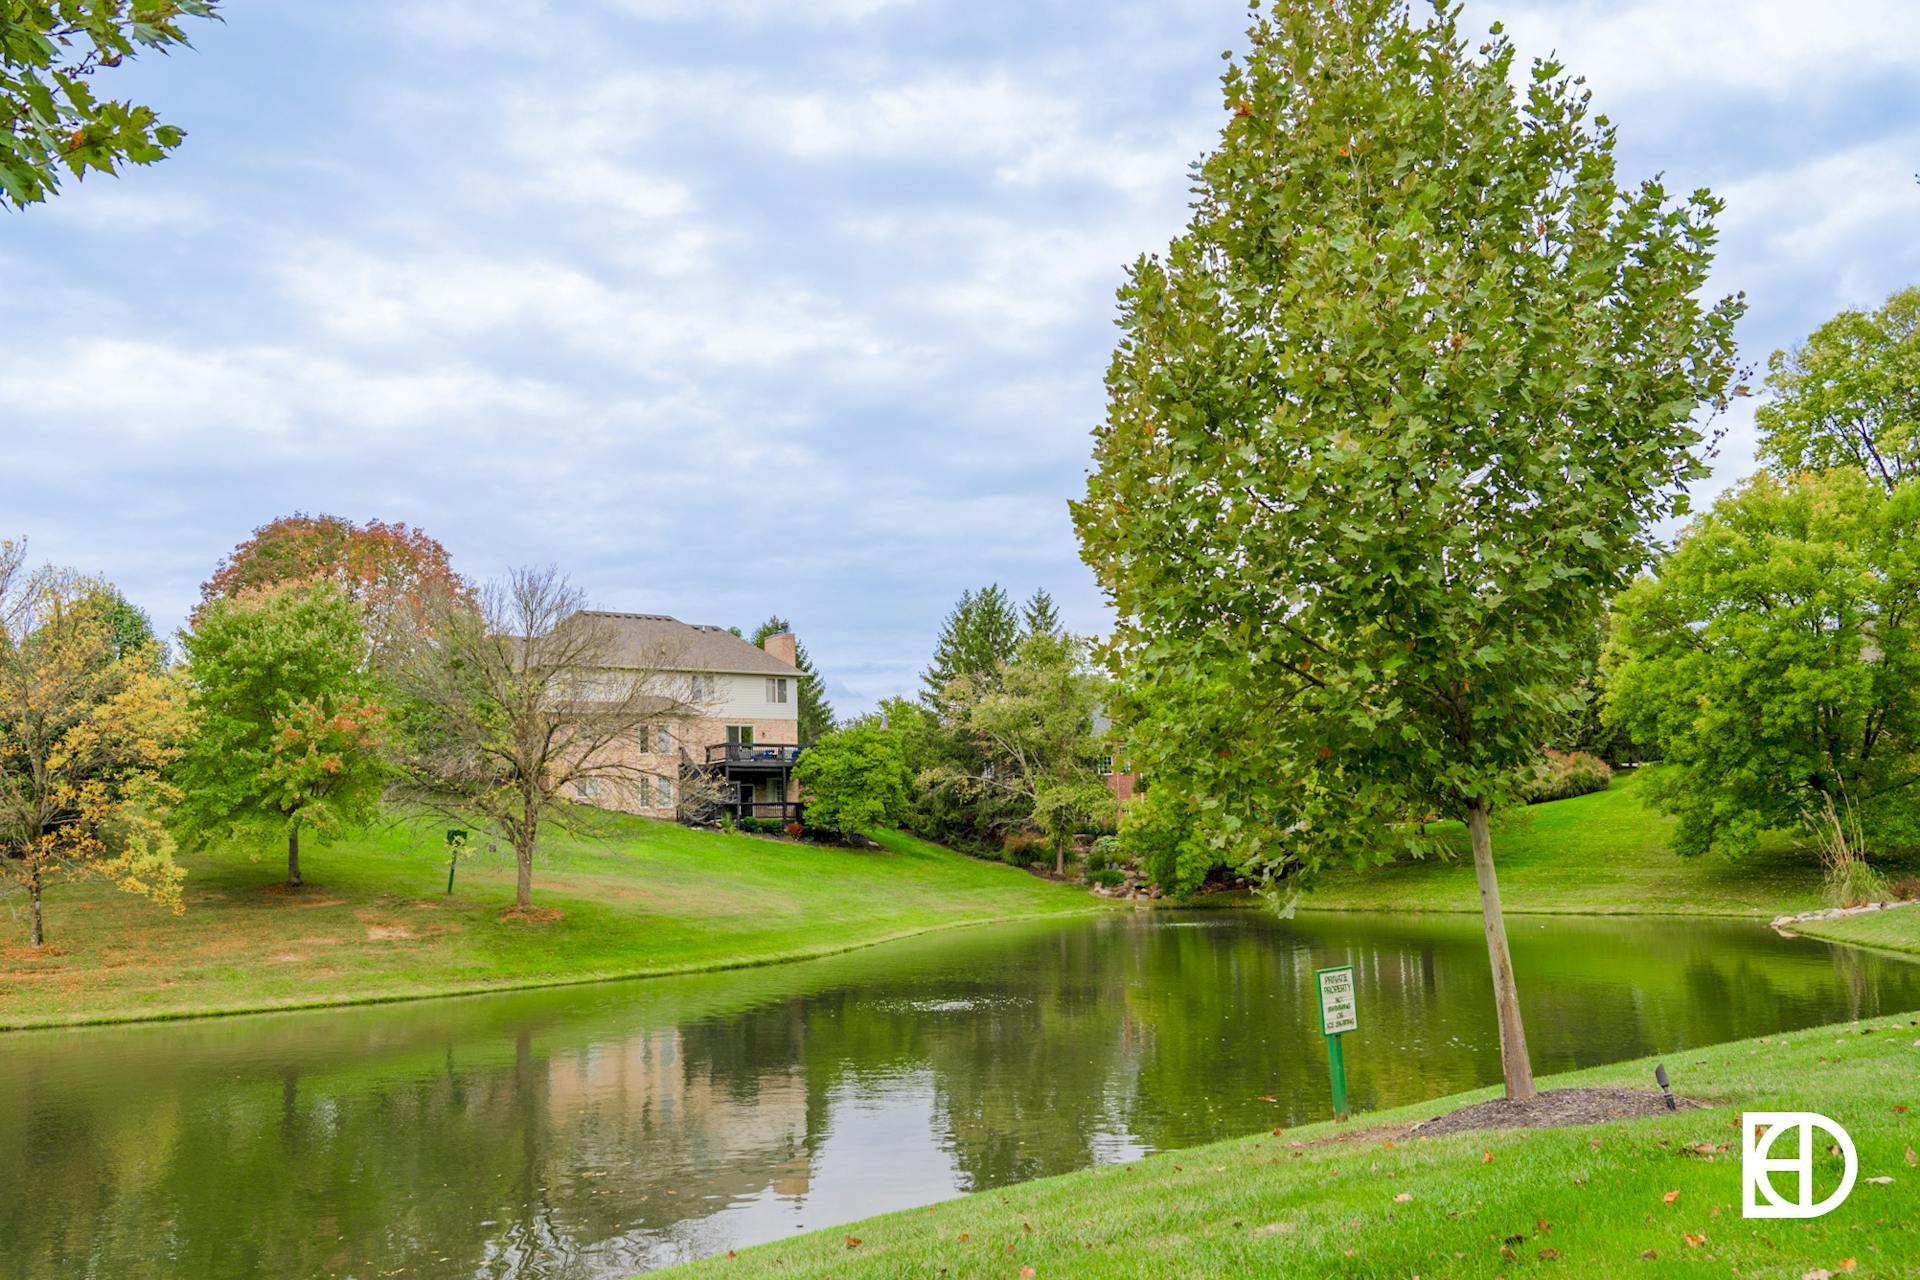 Photo of pond and greenspace in Fox Hollow neighborhood in Zionsville, Indiana.